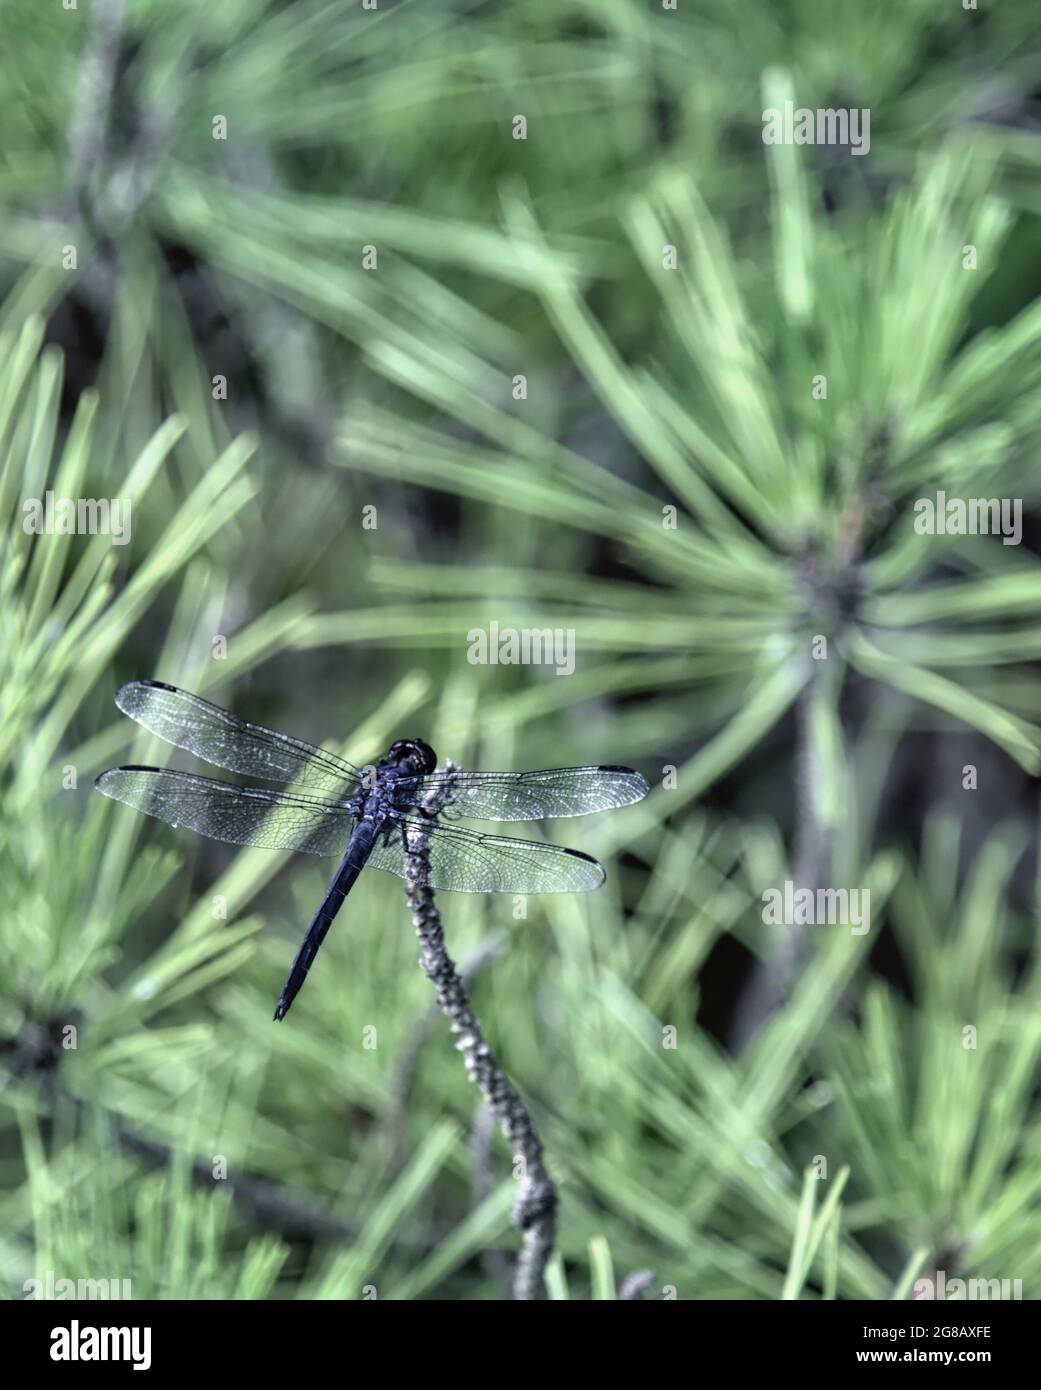 Dragonfly on pine branches Stock Photo